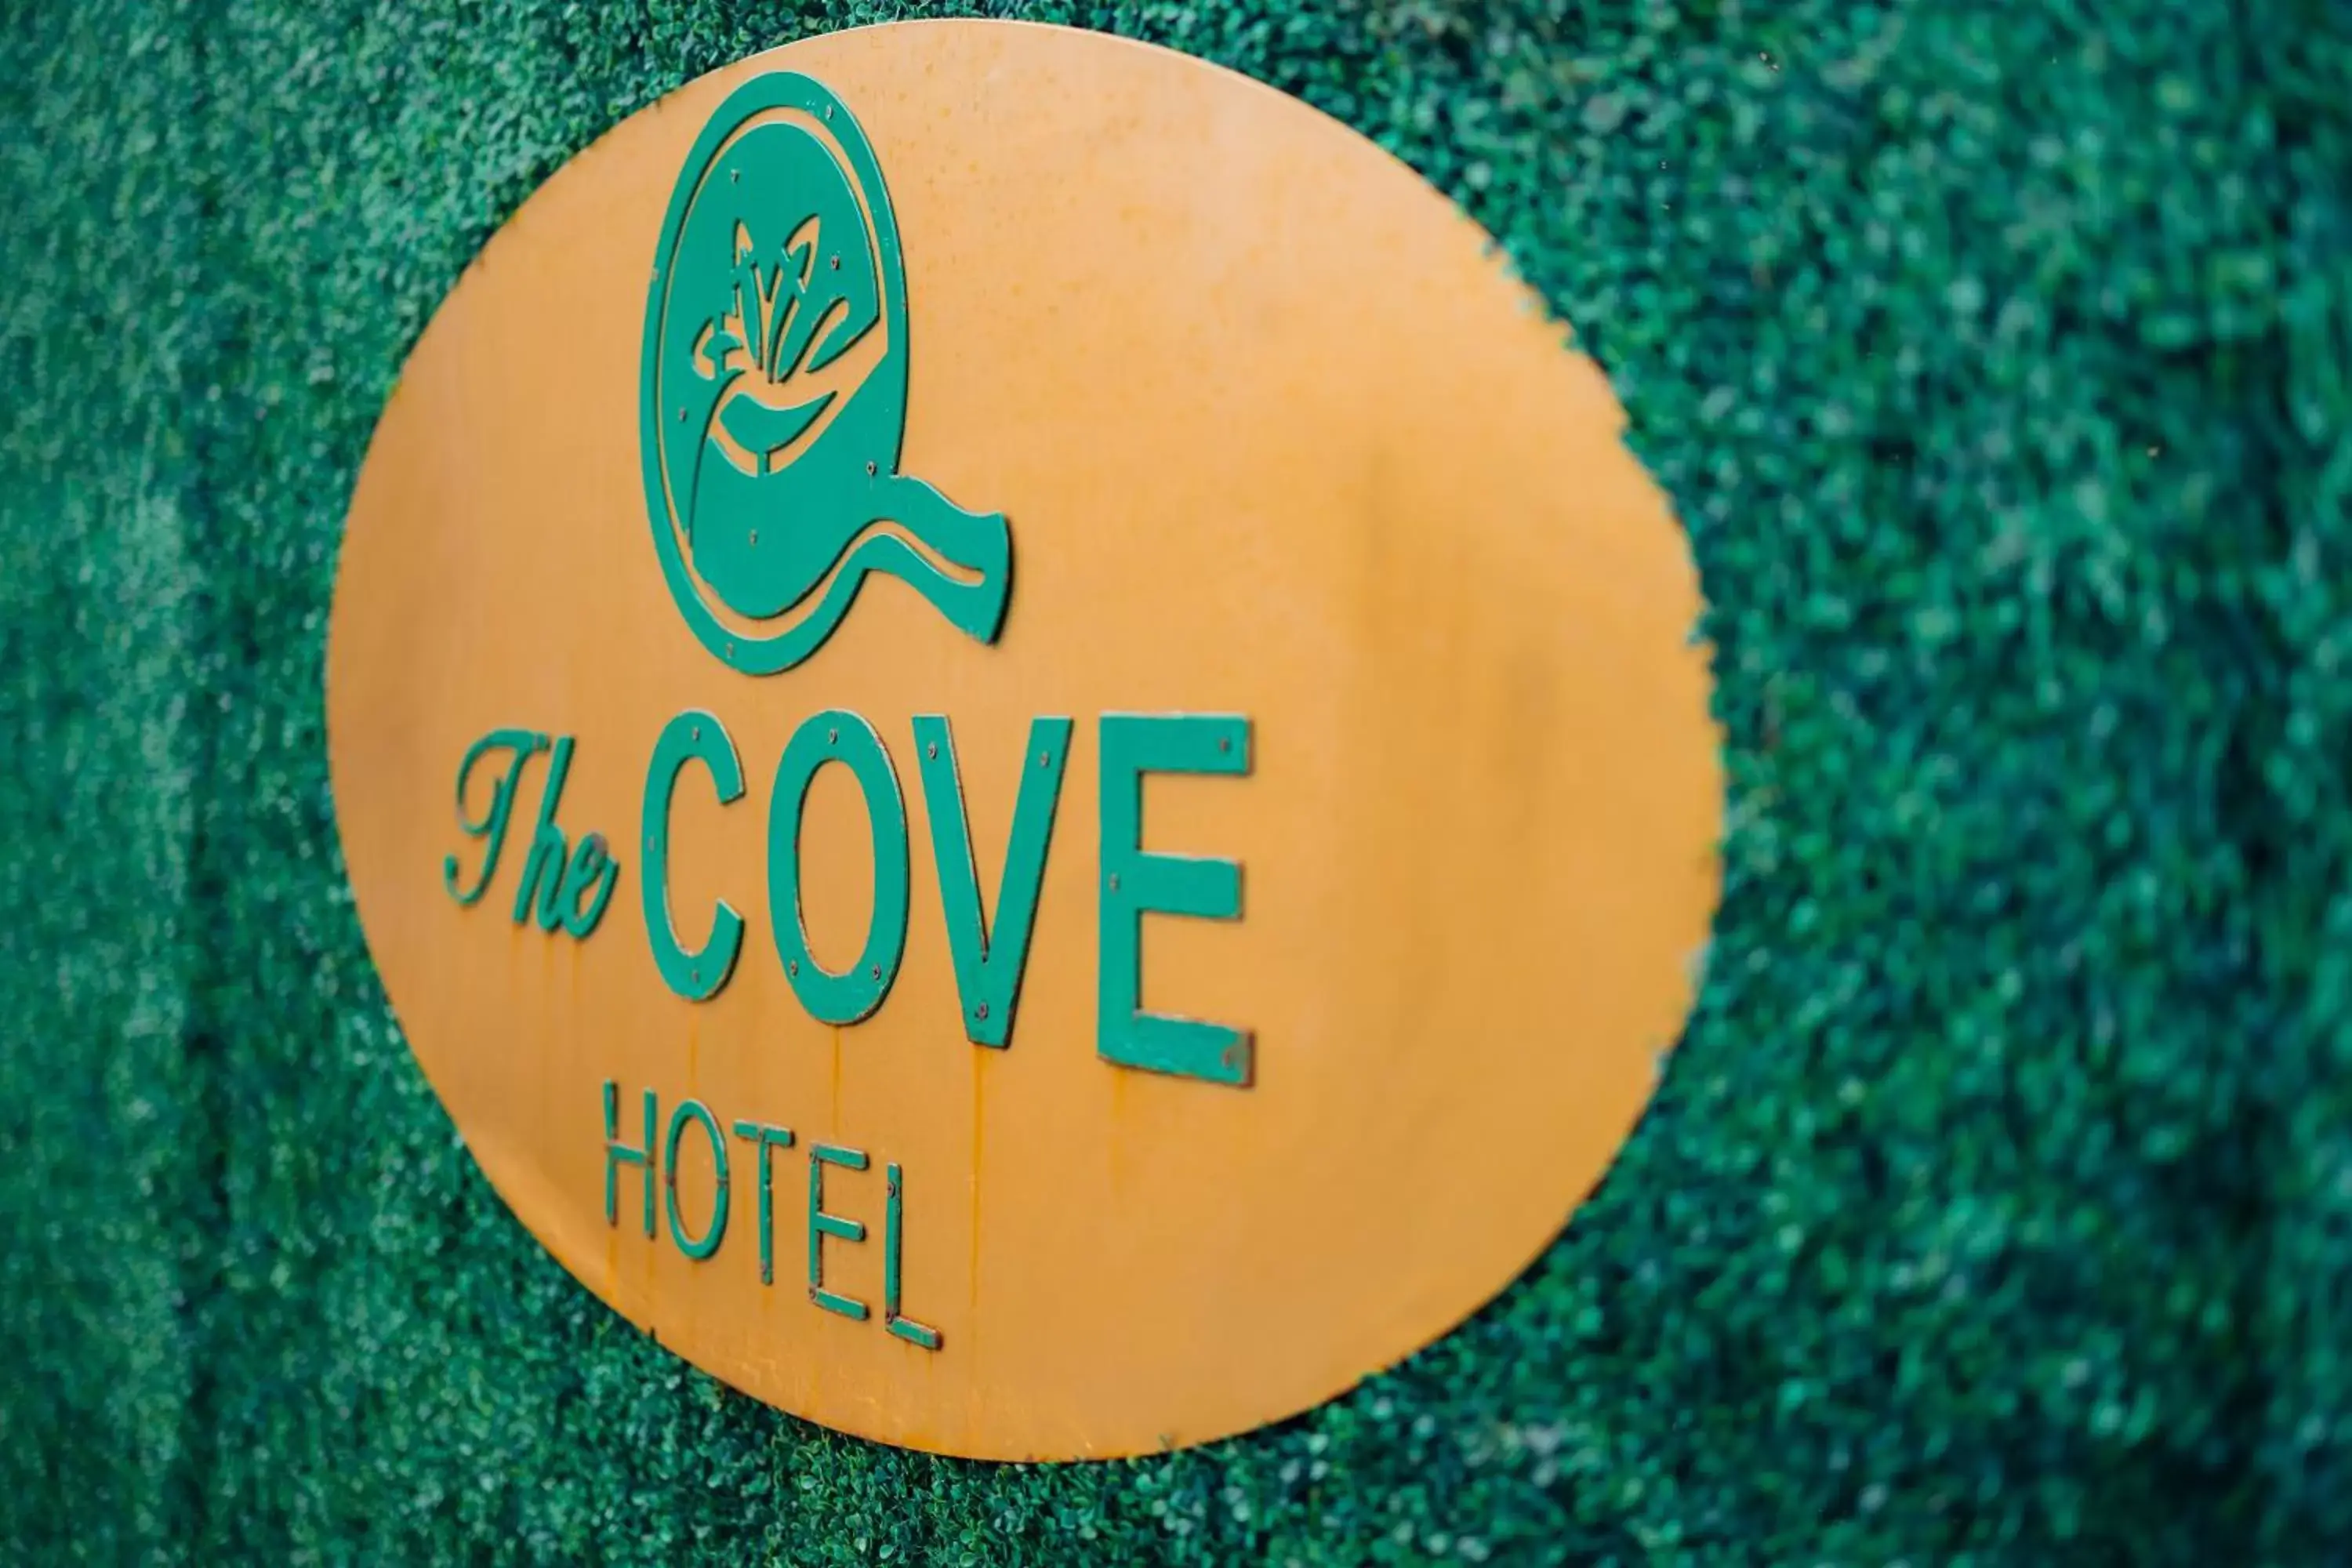 Property logo or sign in The Cove Hotel